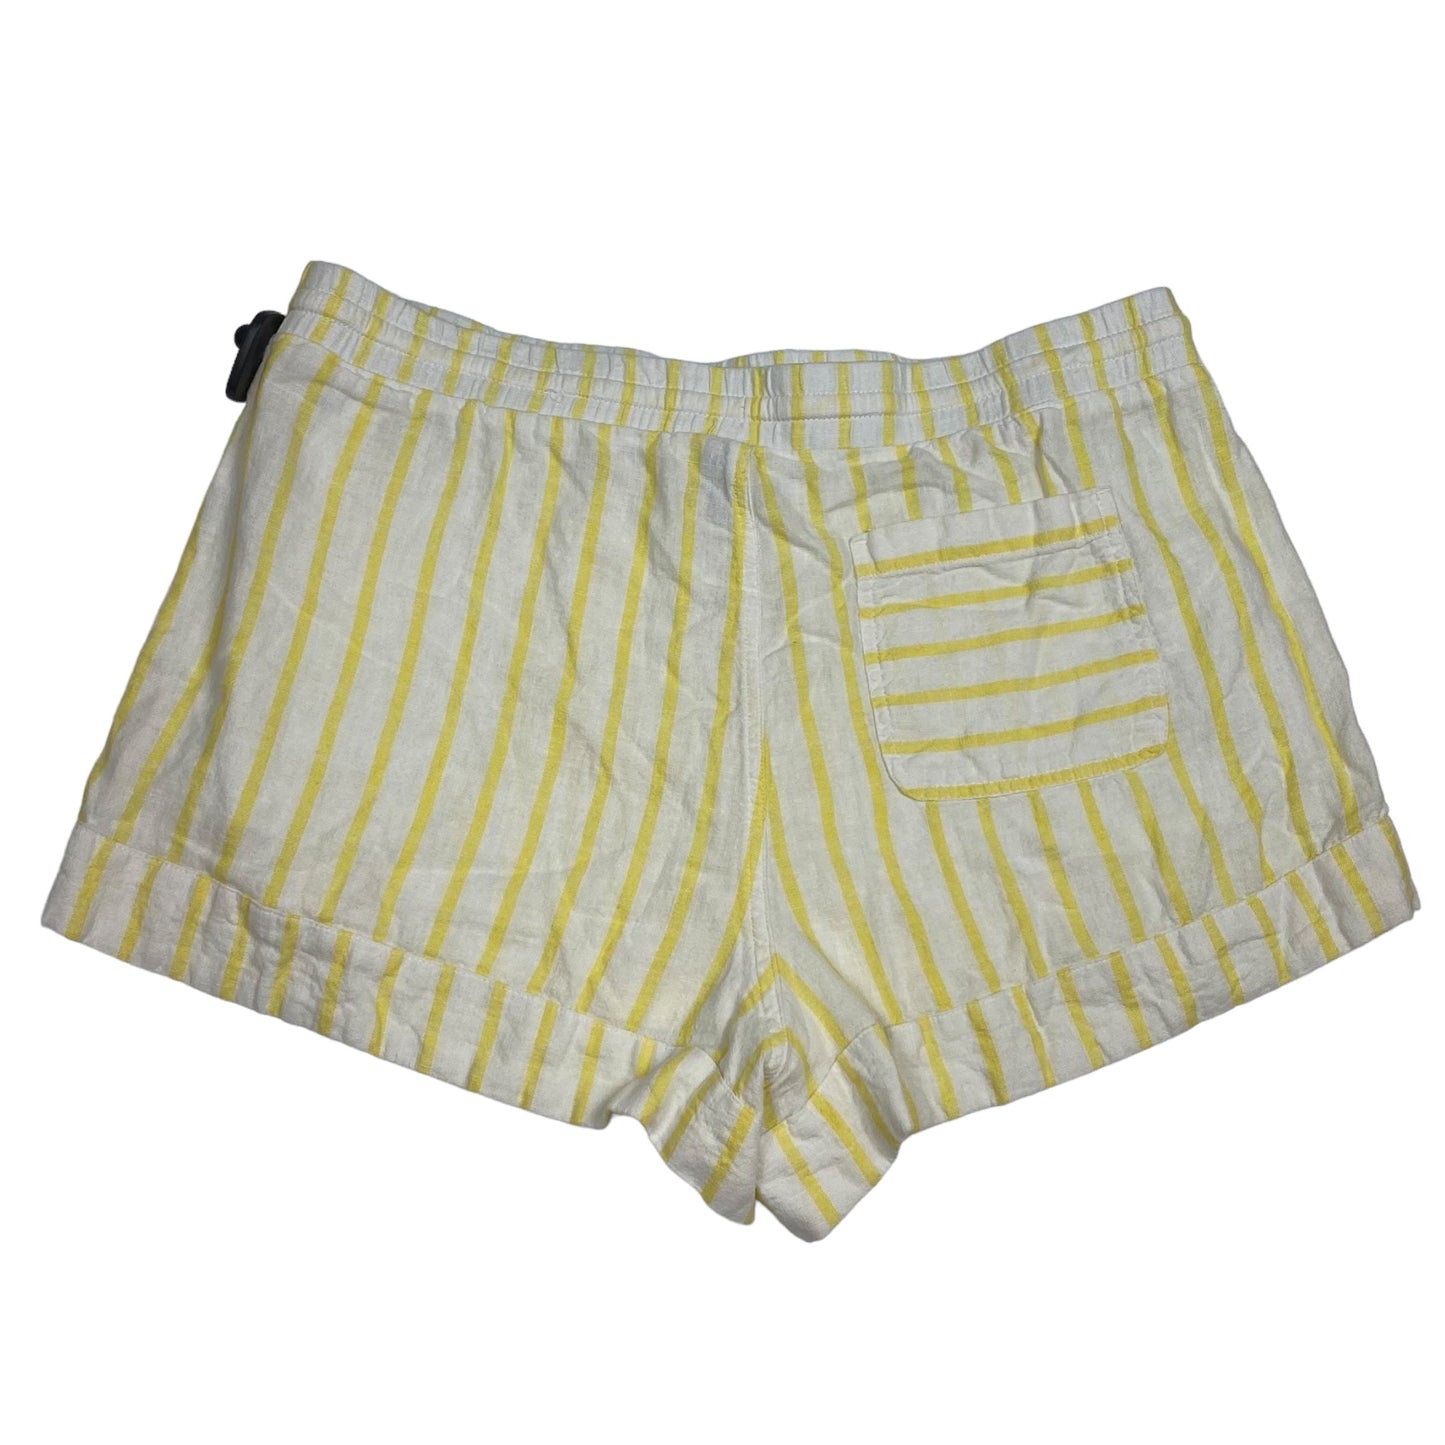 Shorts By Universal Thread  Size: Xl